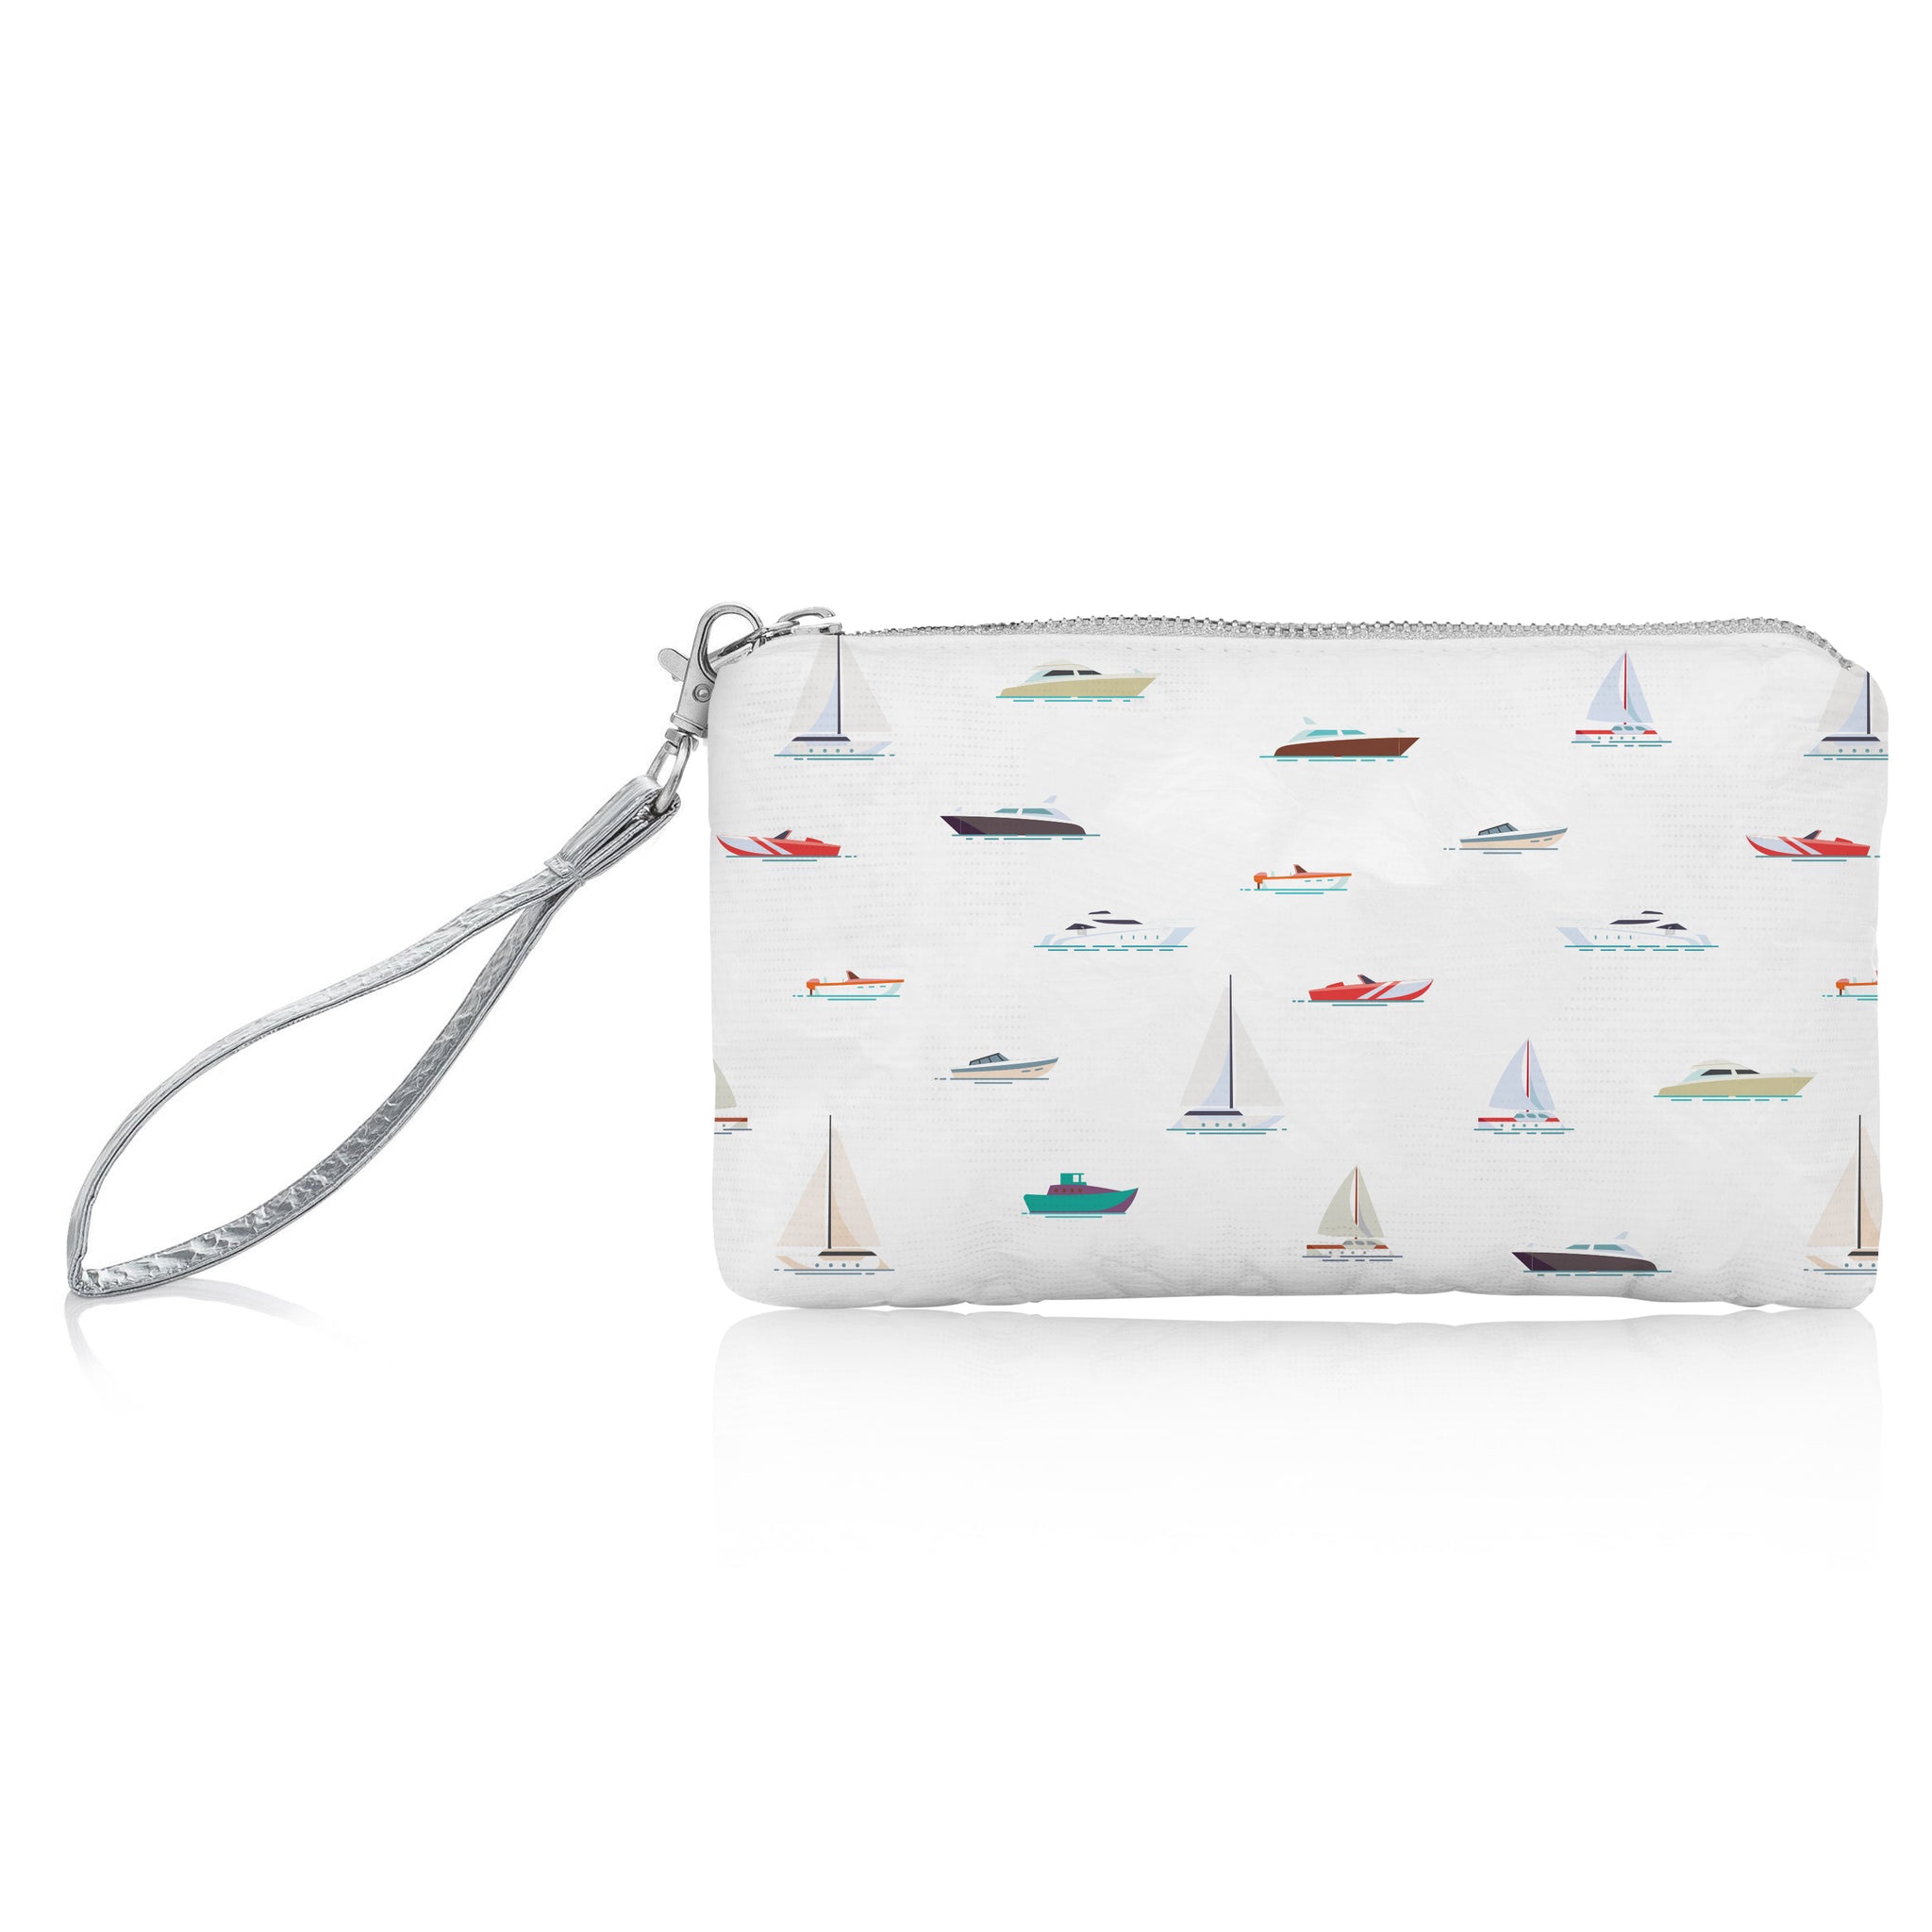 sailboat and motorboat patter on zip wristlet